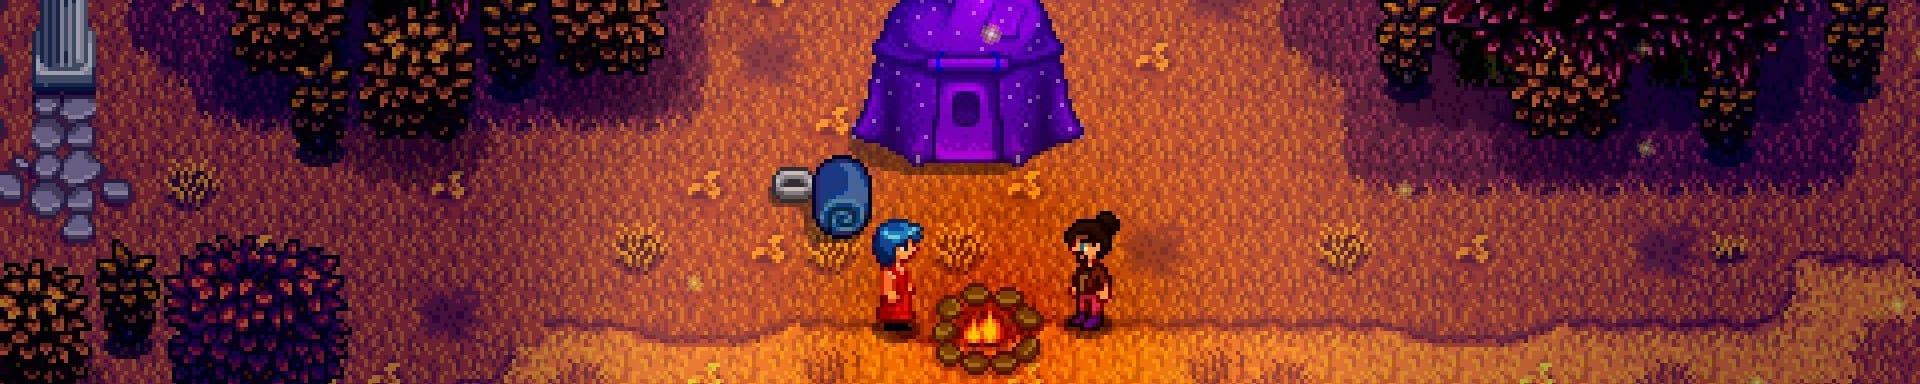 Stardew Valley Multiplayer Guide camping